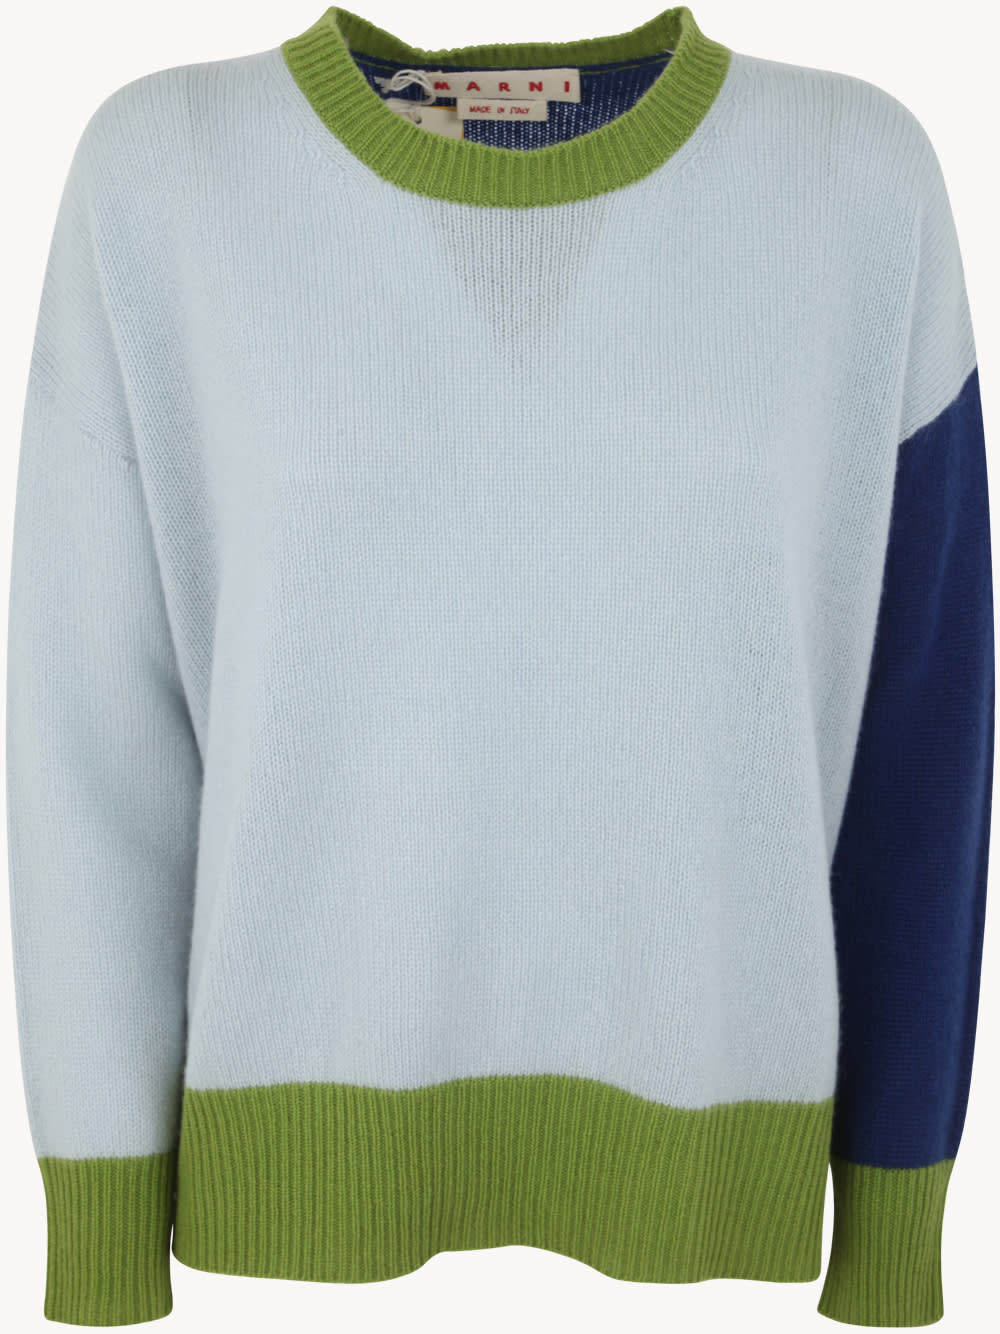 MARNI CREW NECK LONG SLEEVES LOOSE FIT SWEATER